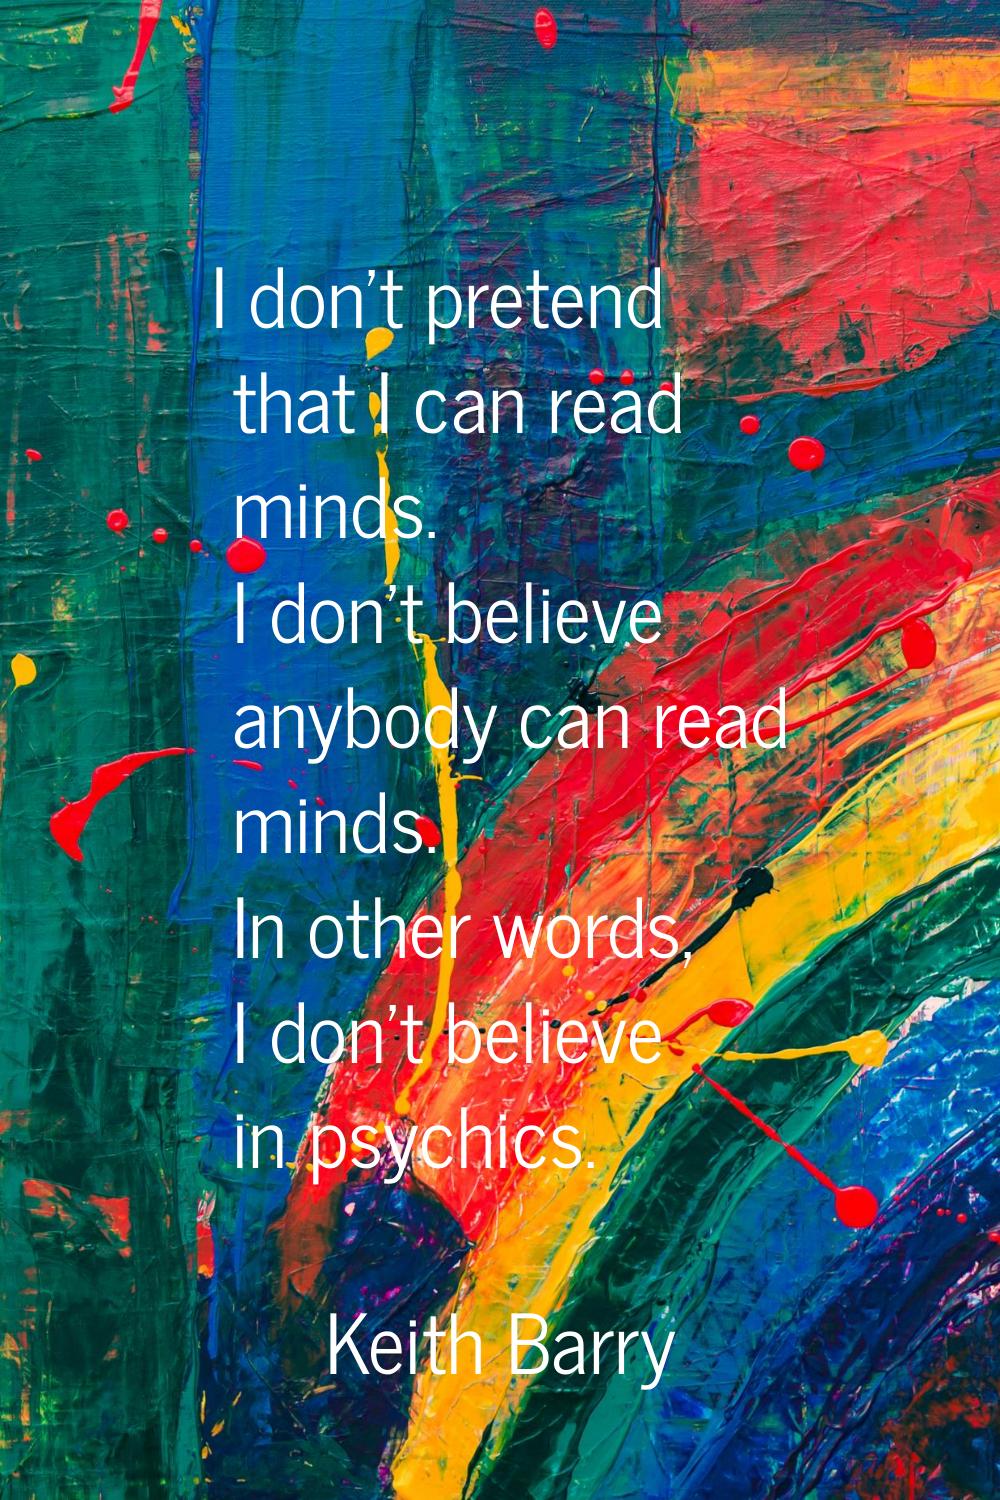 I don't pretend that I can read minds. I don't believe anybody can read minds. In other words, I do